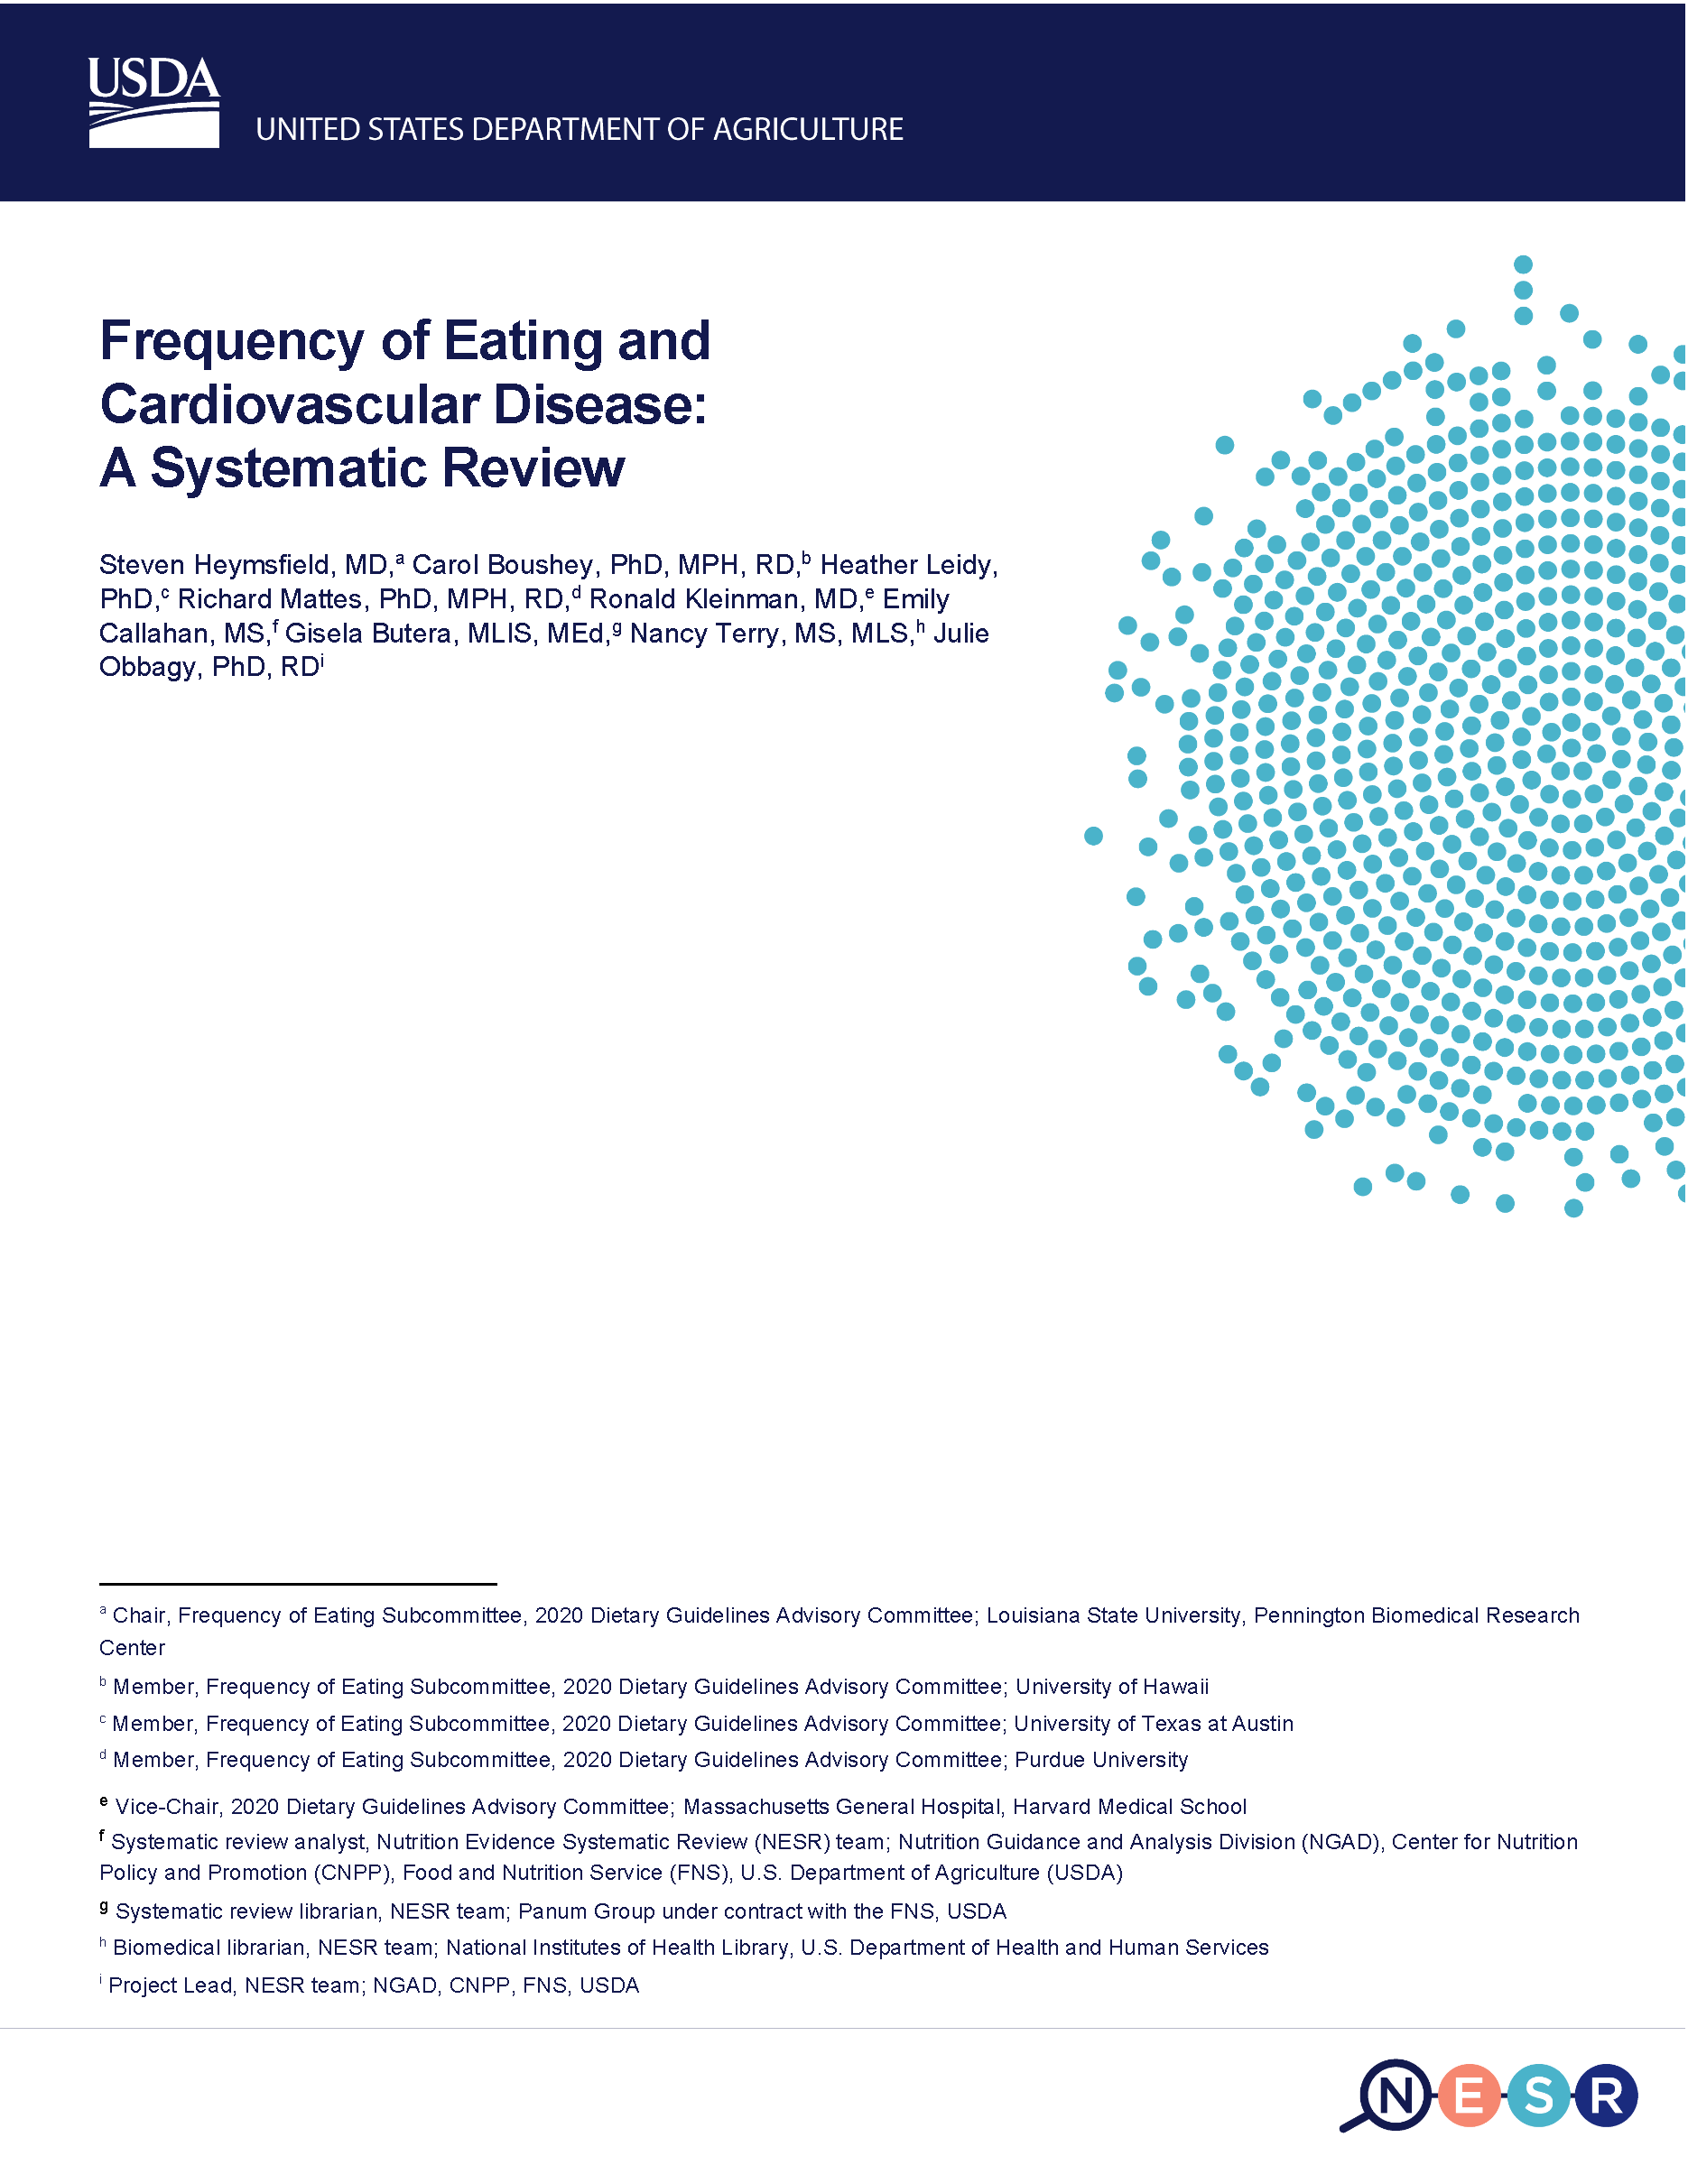 Cover of frequency of eating and cardiovascular disease report